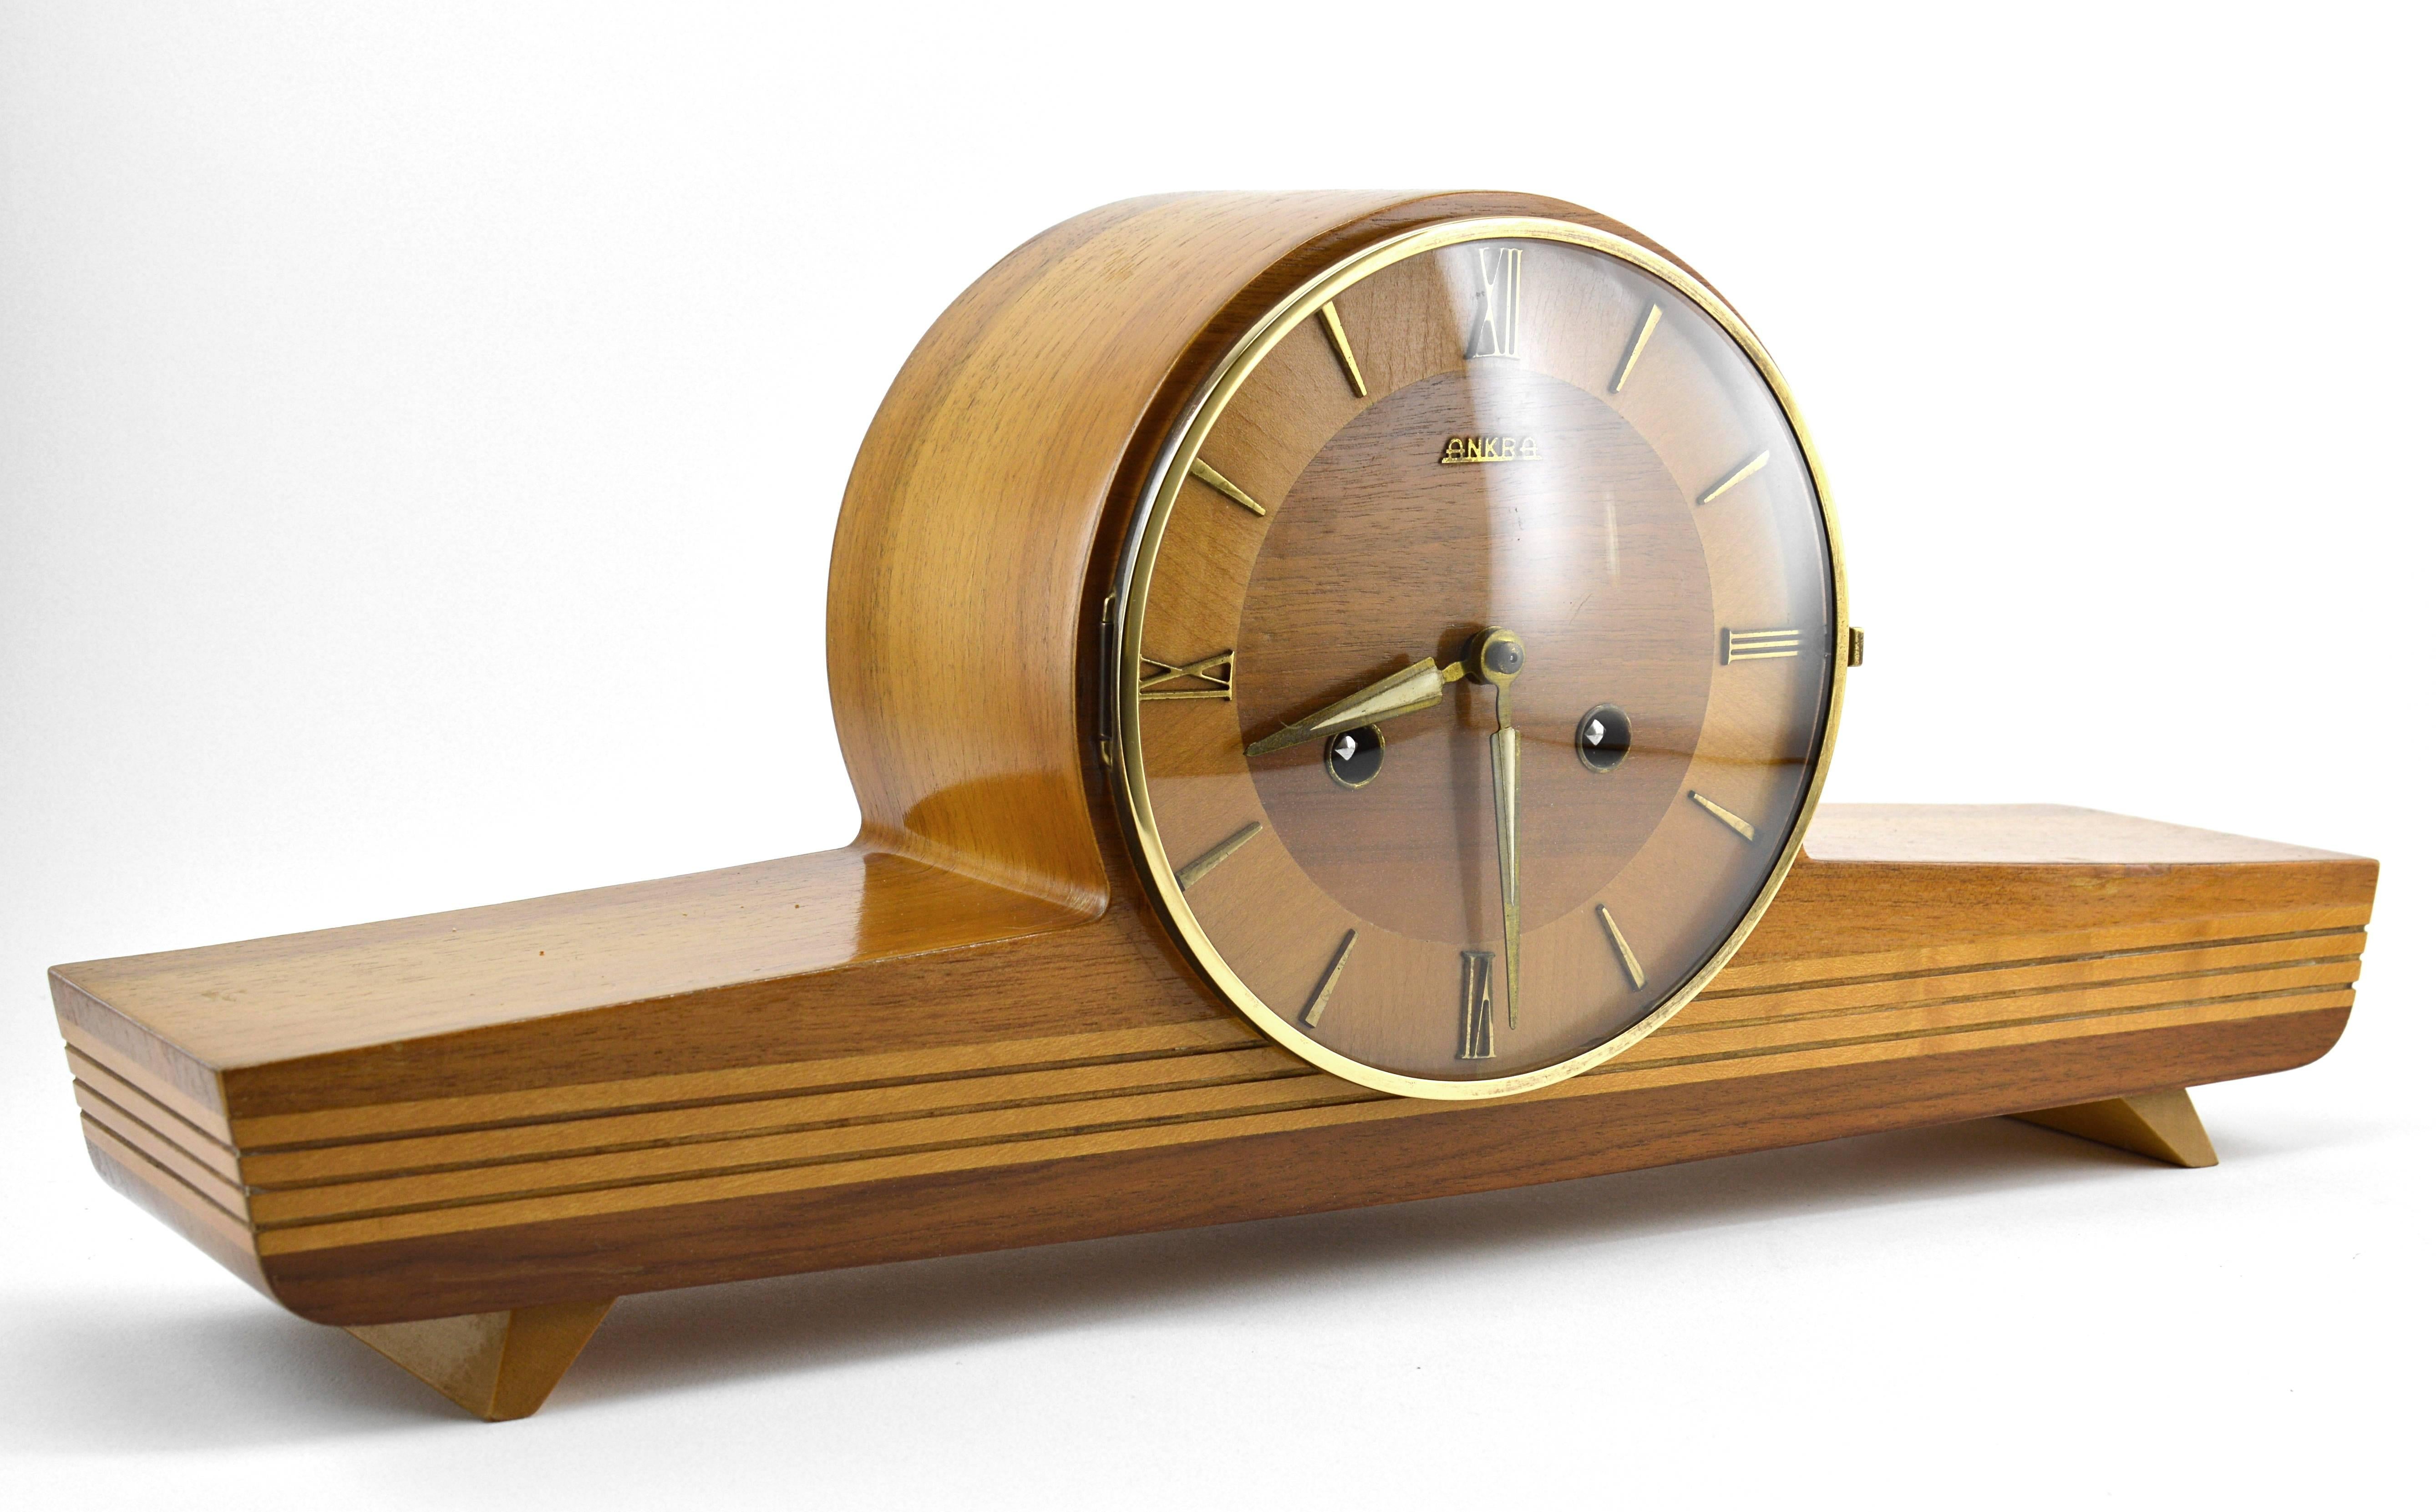 German midcentury clock, circa 1950. Wood, brass and glass. Original beveled glass. Comes with its key. Original mechanism. Keeps good time. Chime ok.
 